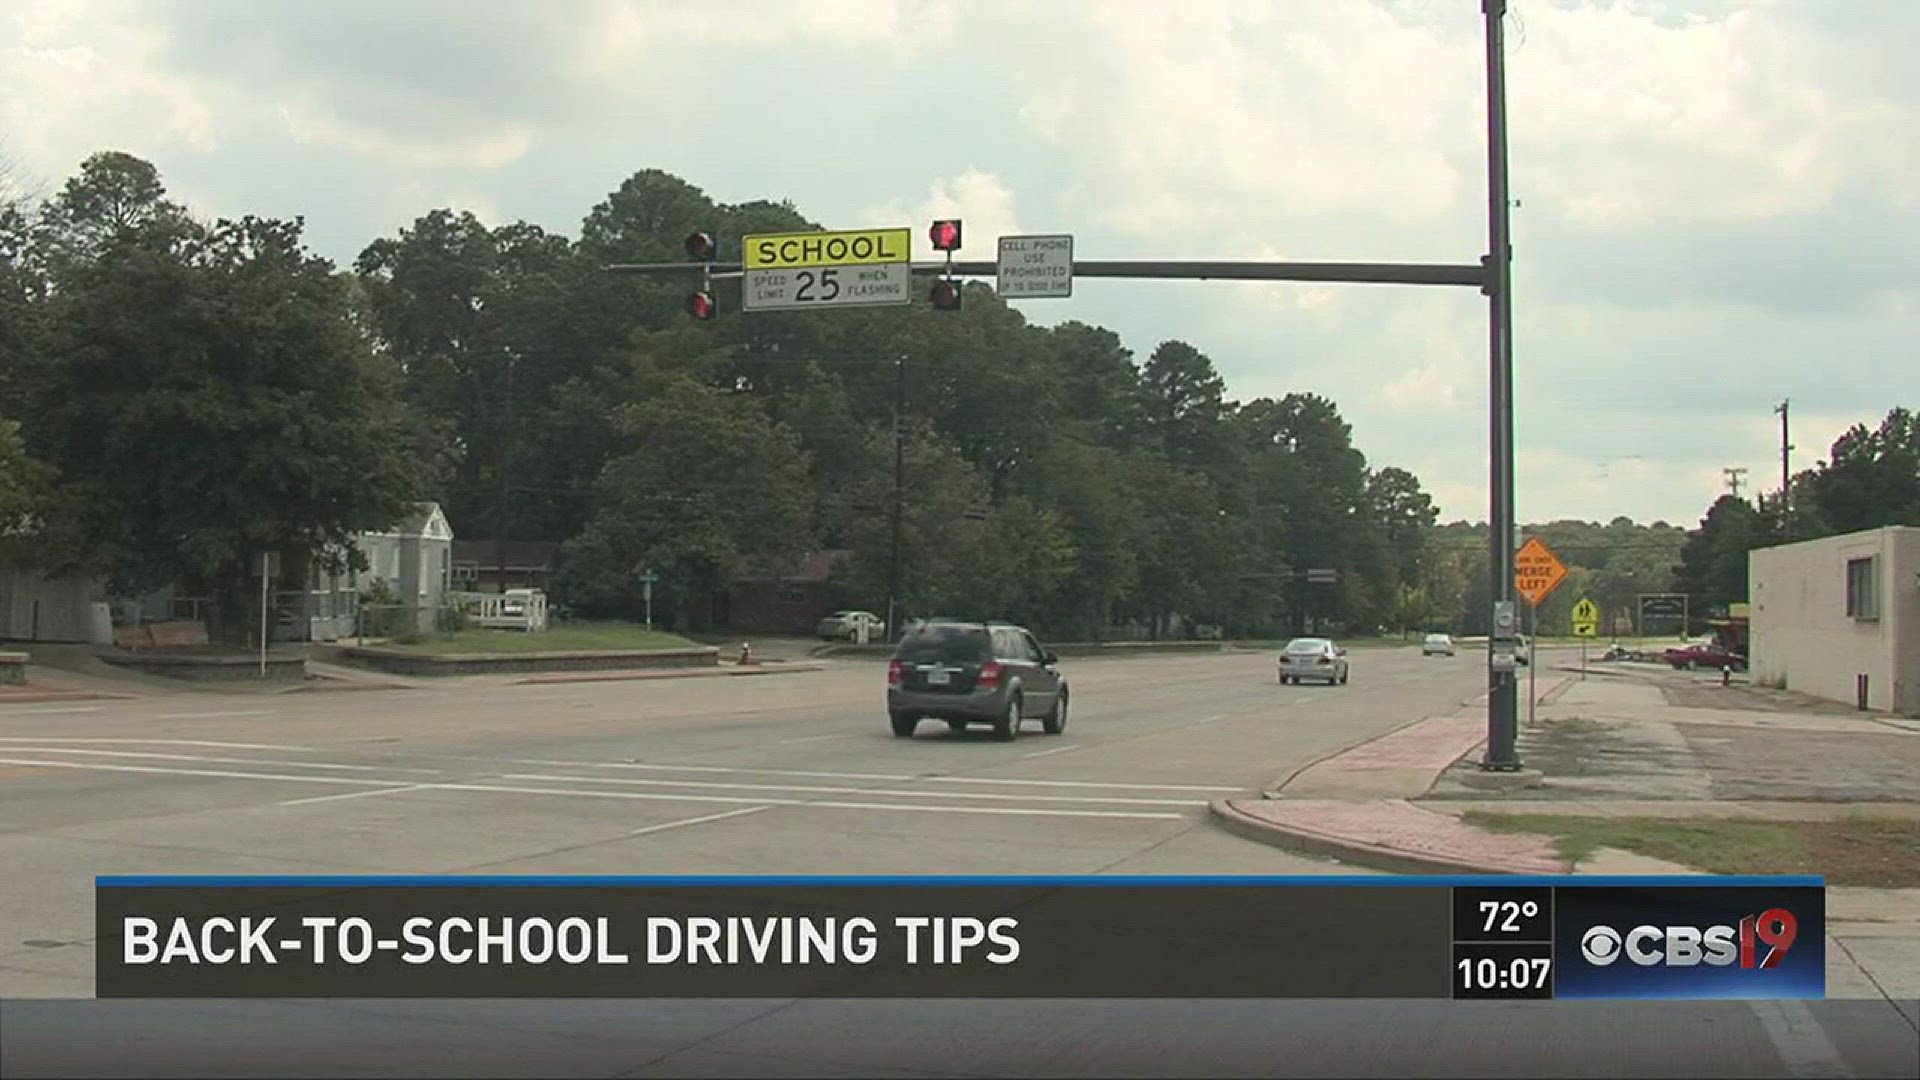 Back-to-school is just around the corner - and there are some road rules you may have forgotten over the Summer.